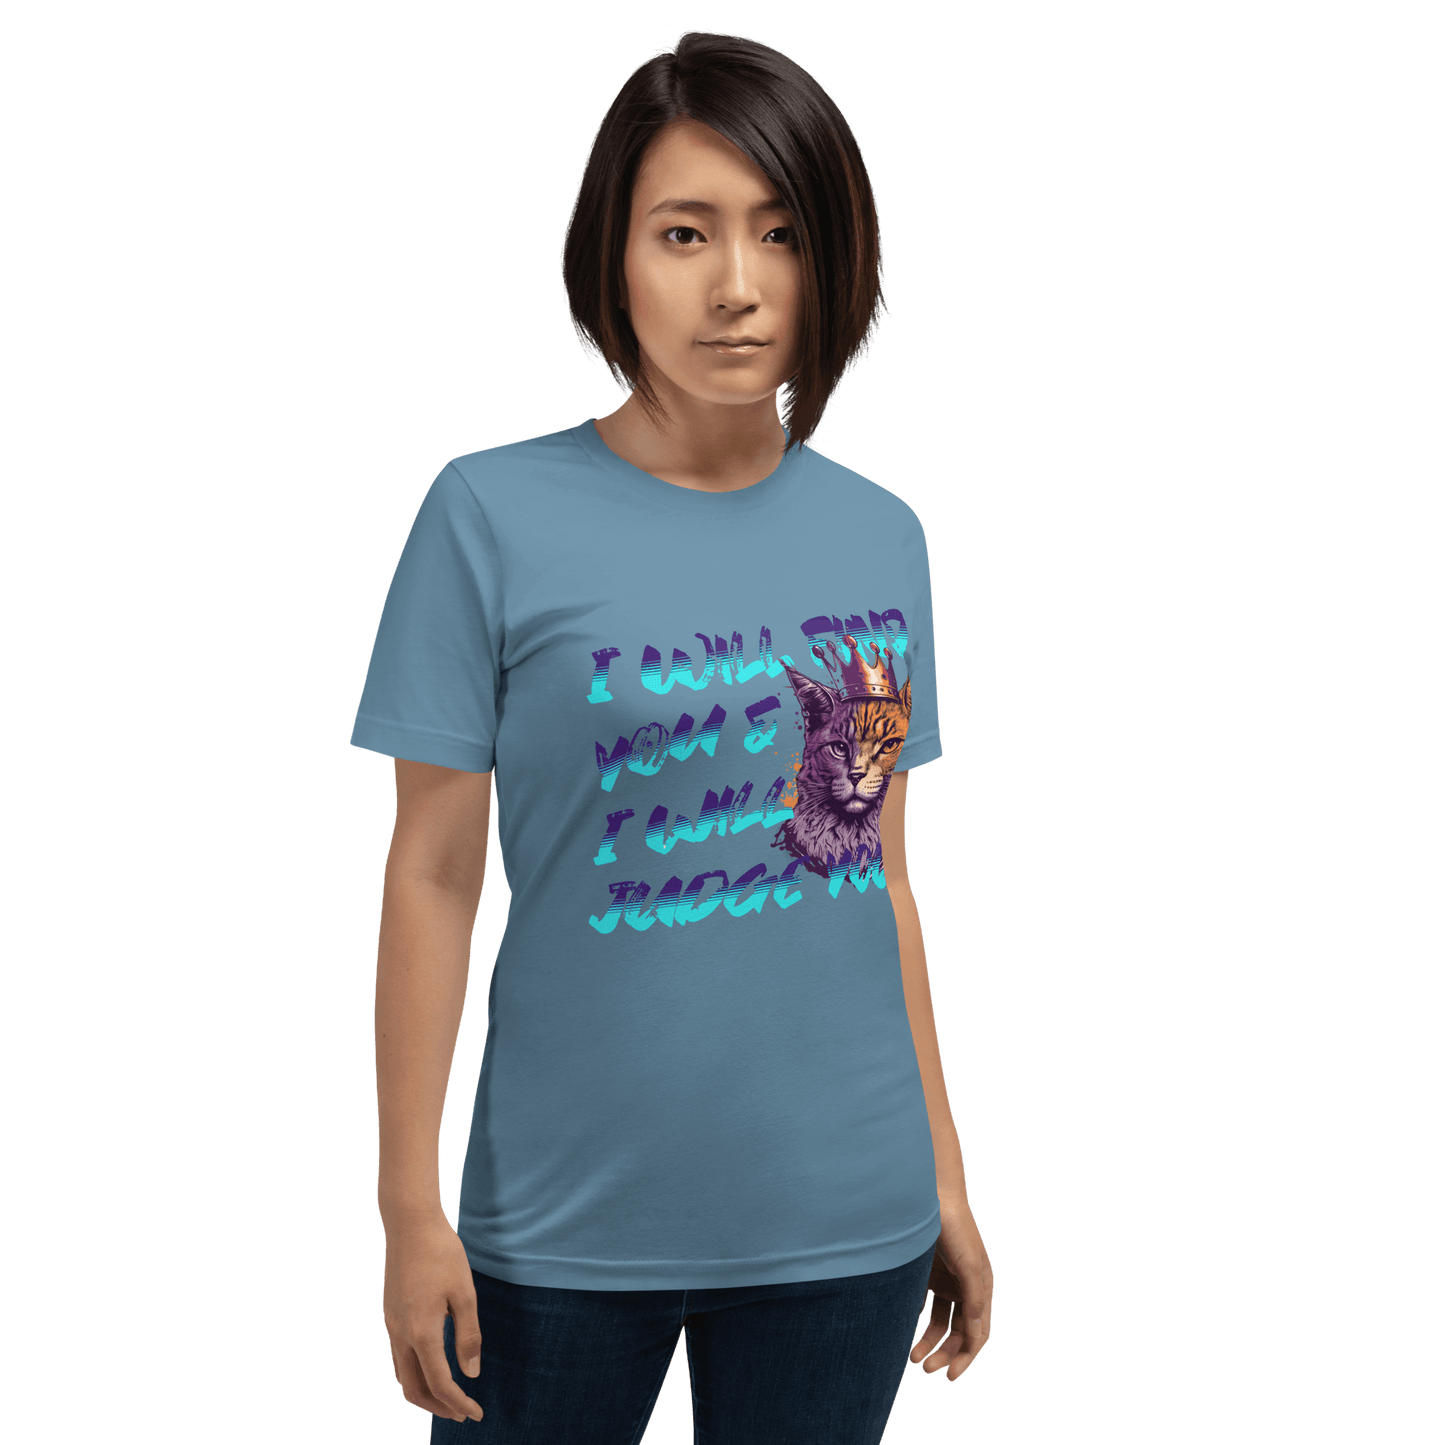 I Will Find You & I Will Judge You Crew Neck T-Shirt - Pet Pride Tees